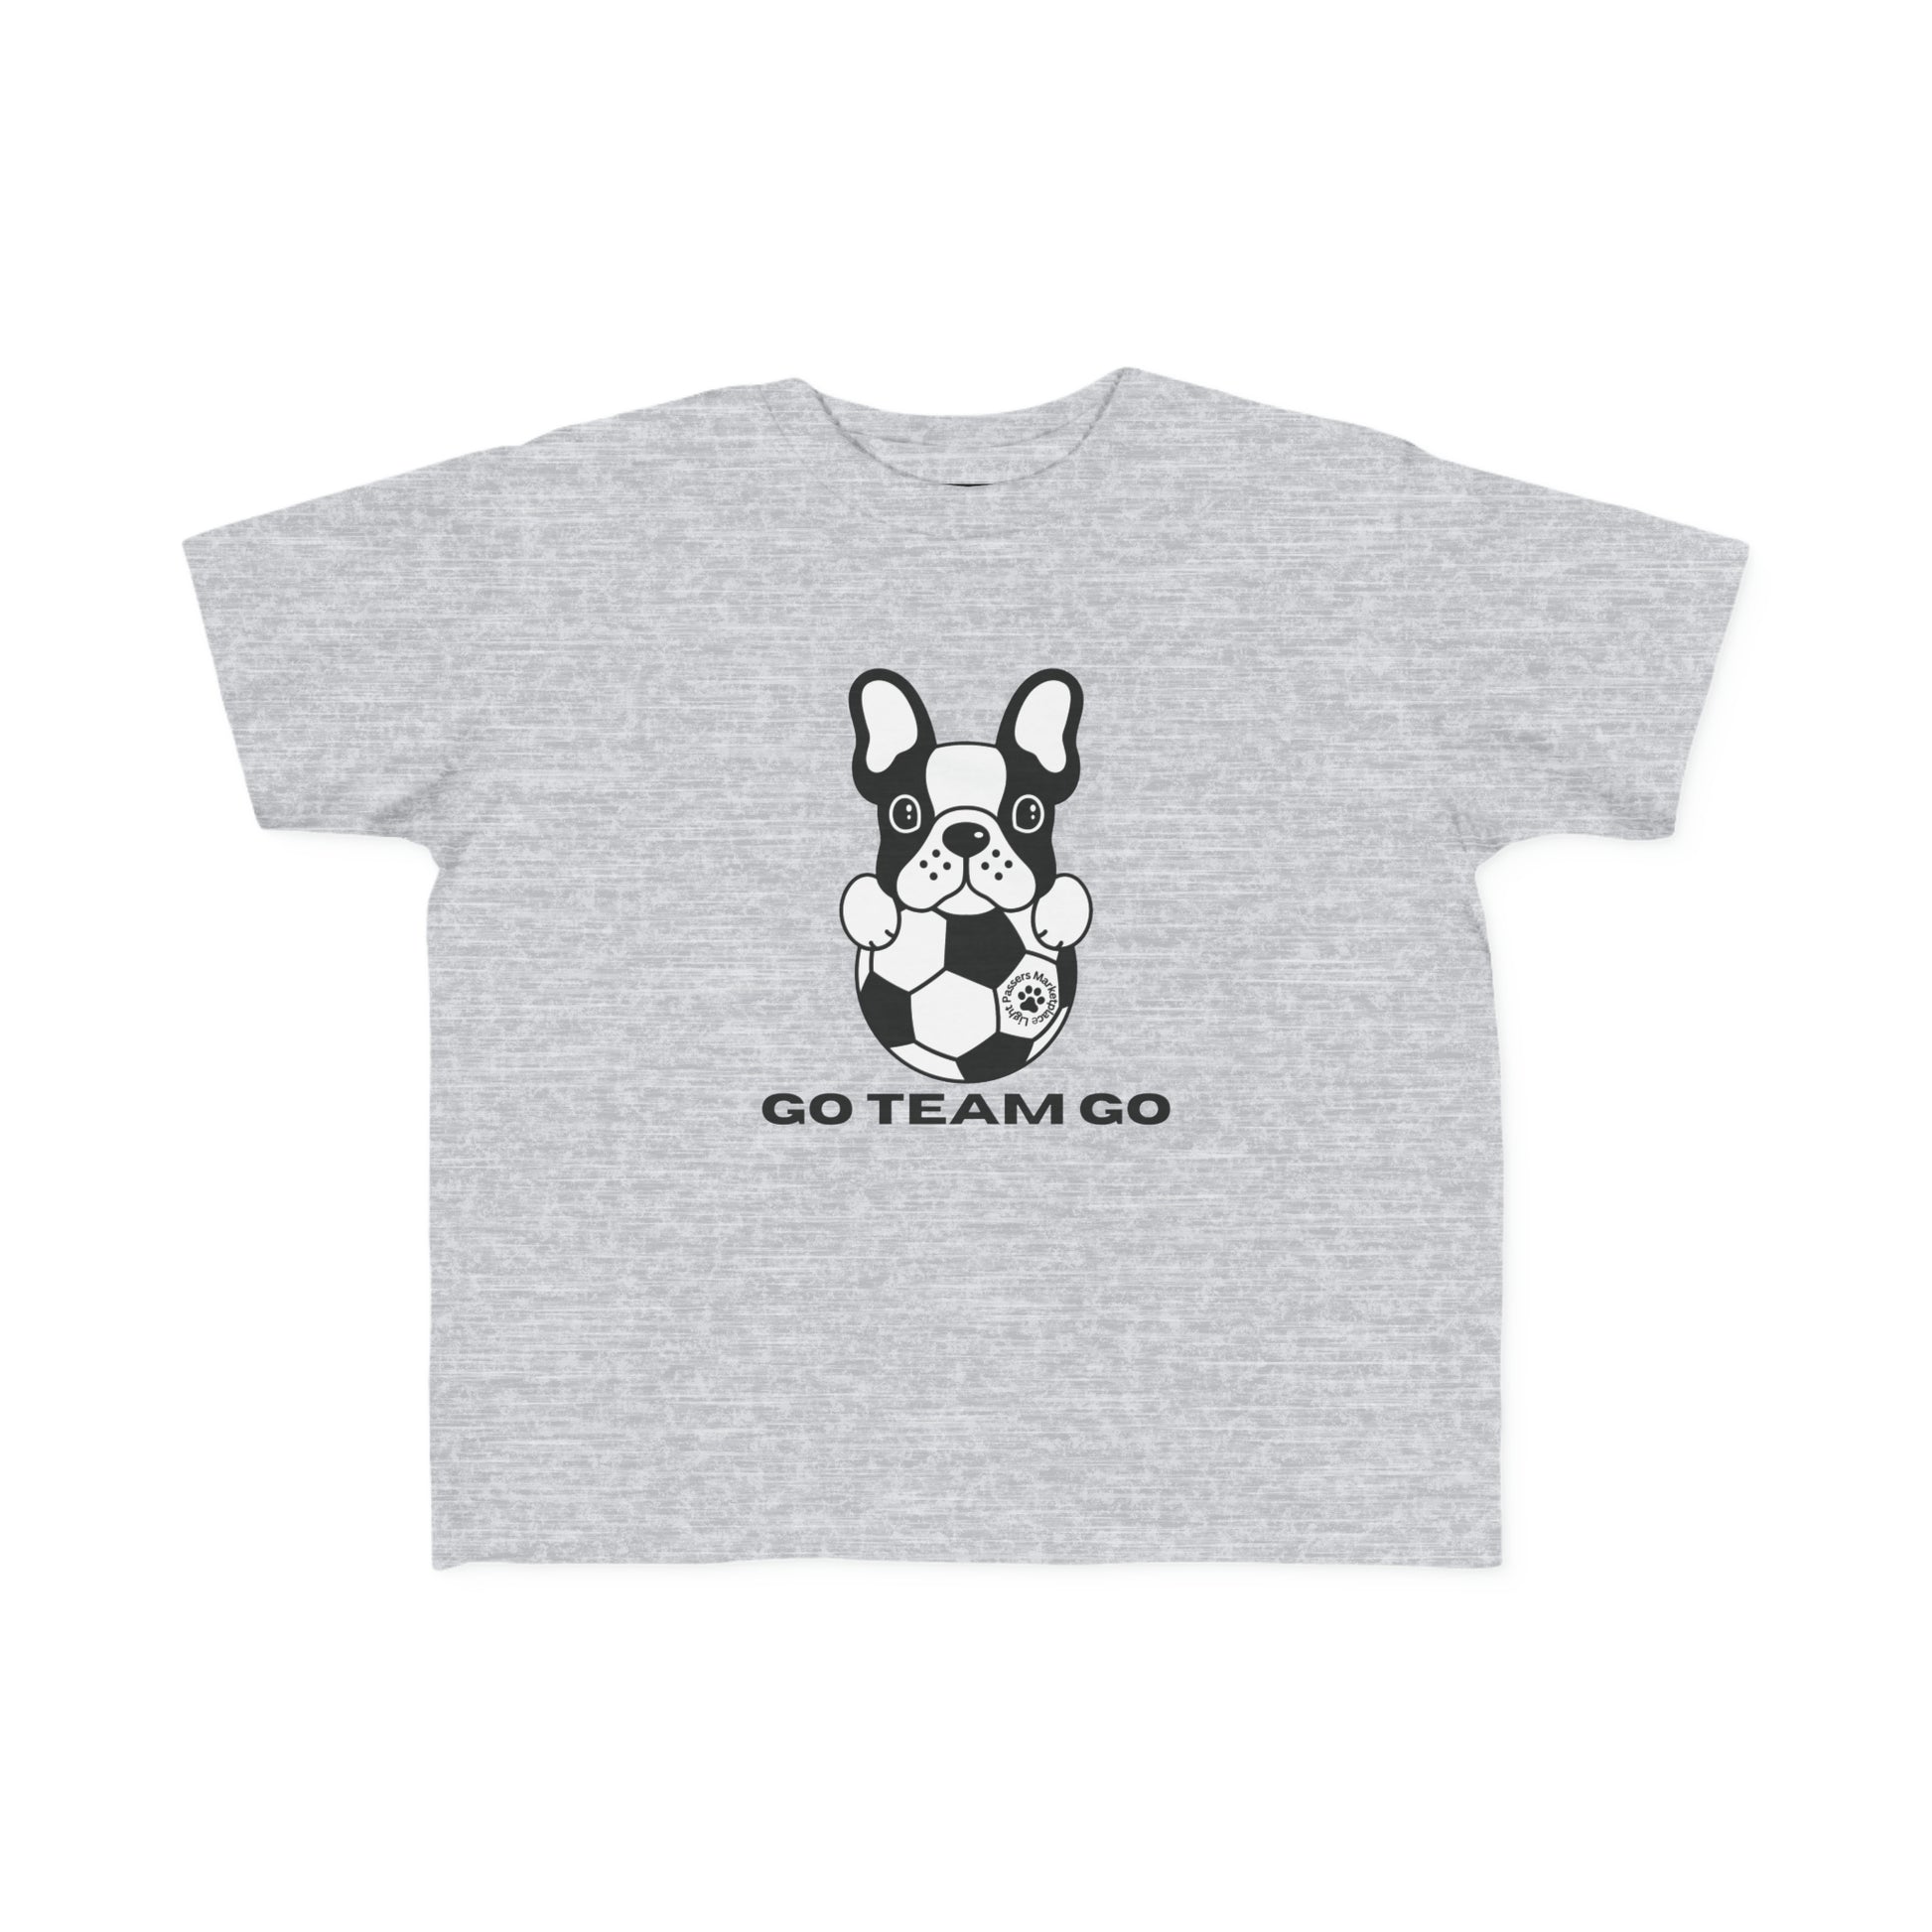 A toddler's Soccer Dog Go Team Go t-shirt featuring a black and white dog with a football, made of soft, durable cotton with a high-quality print.